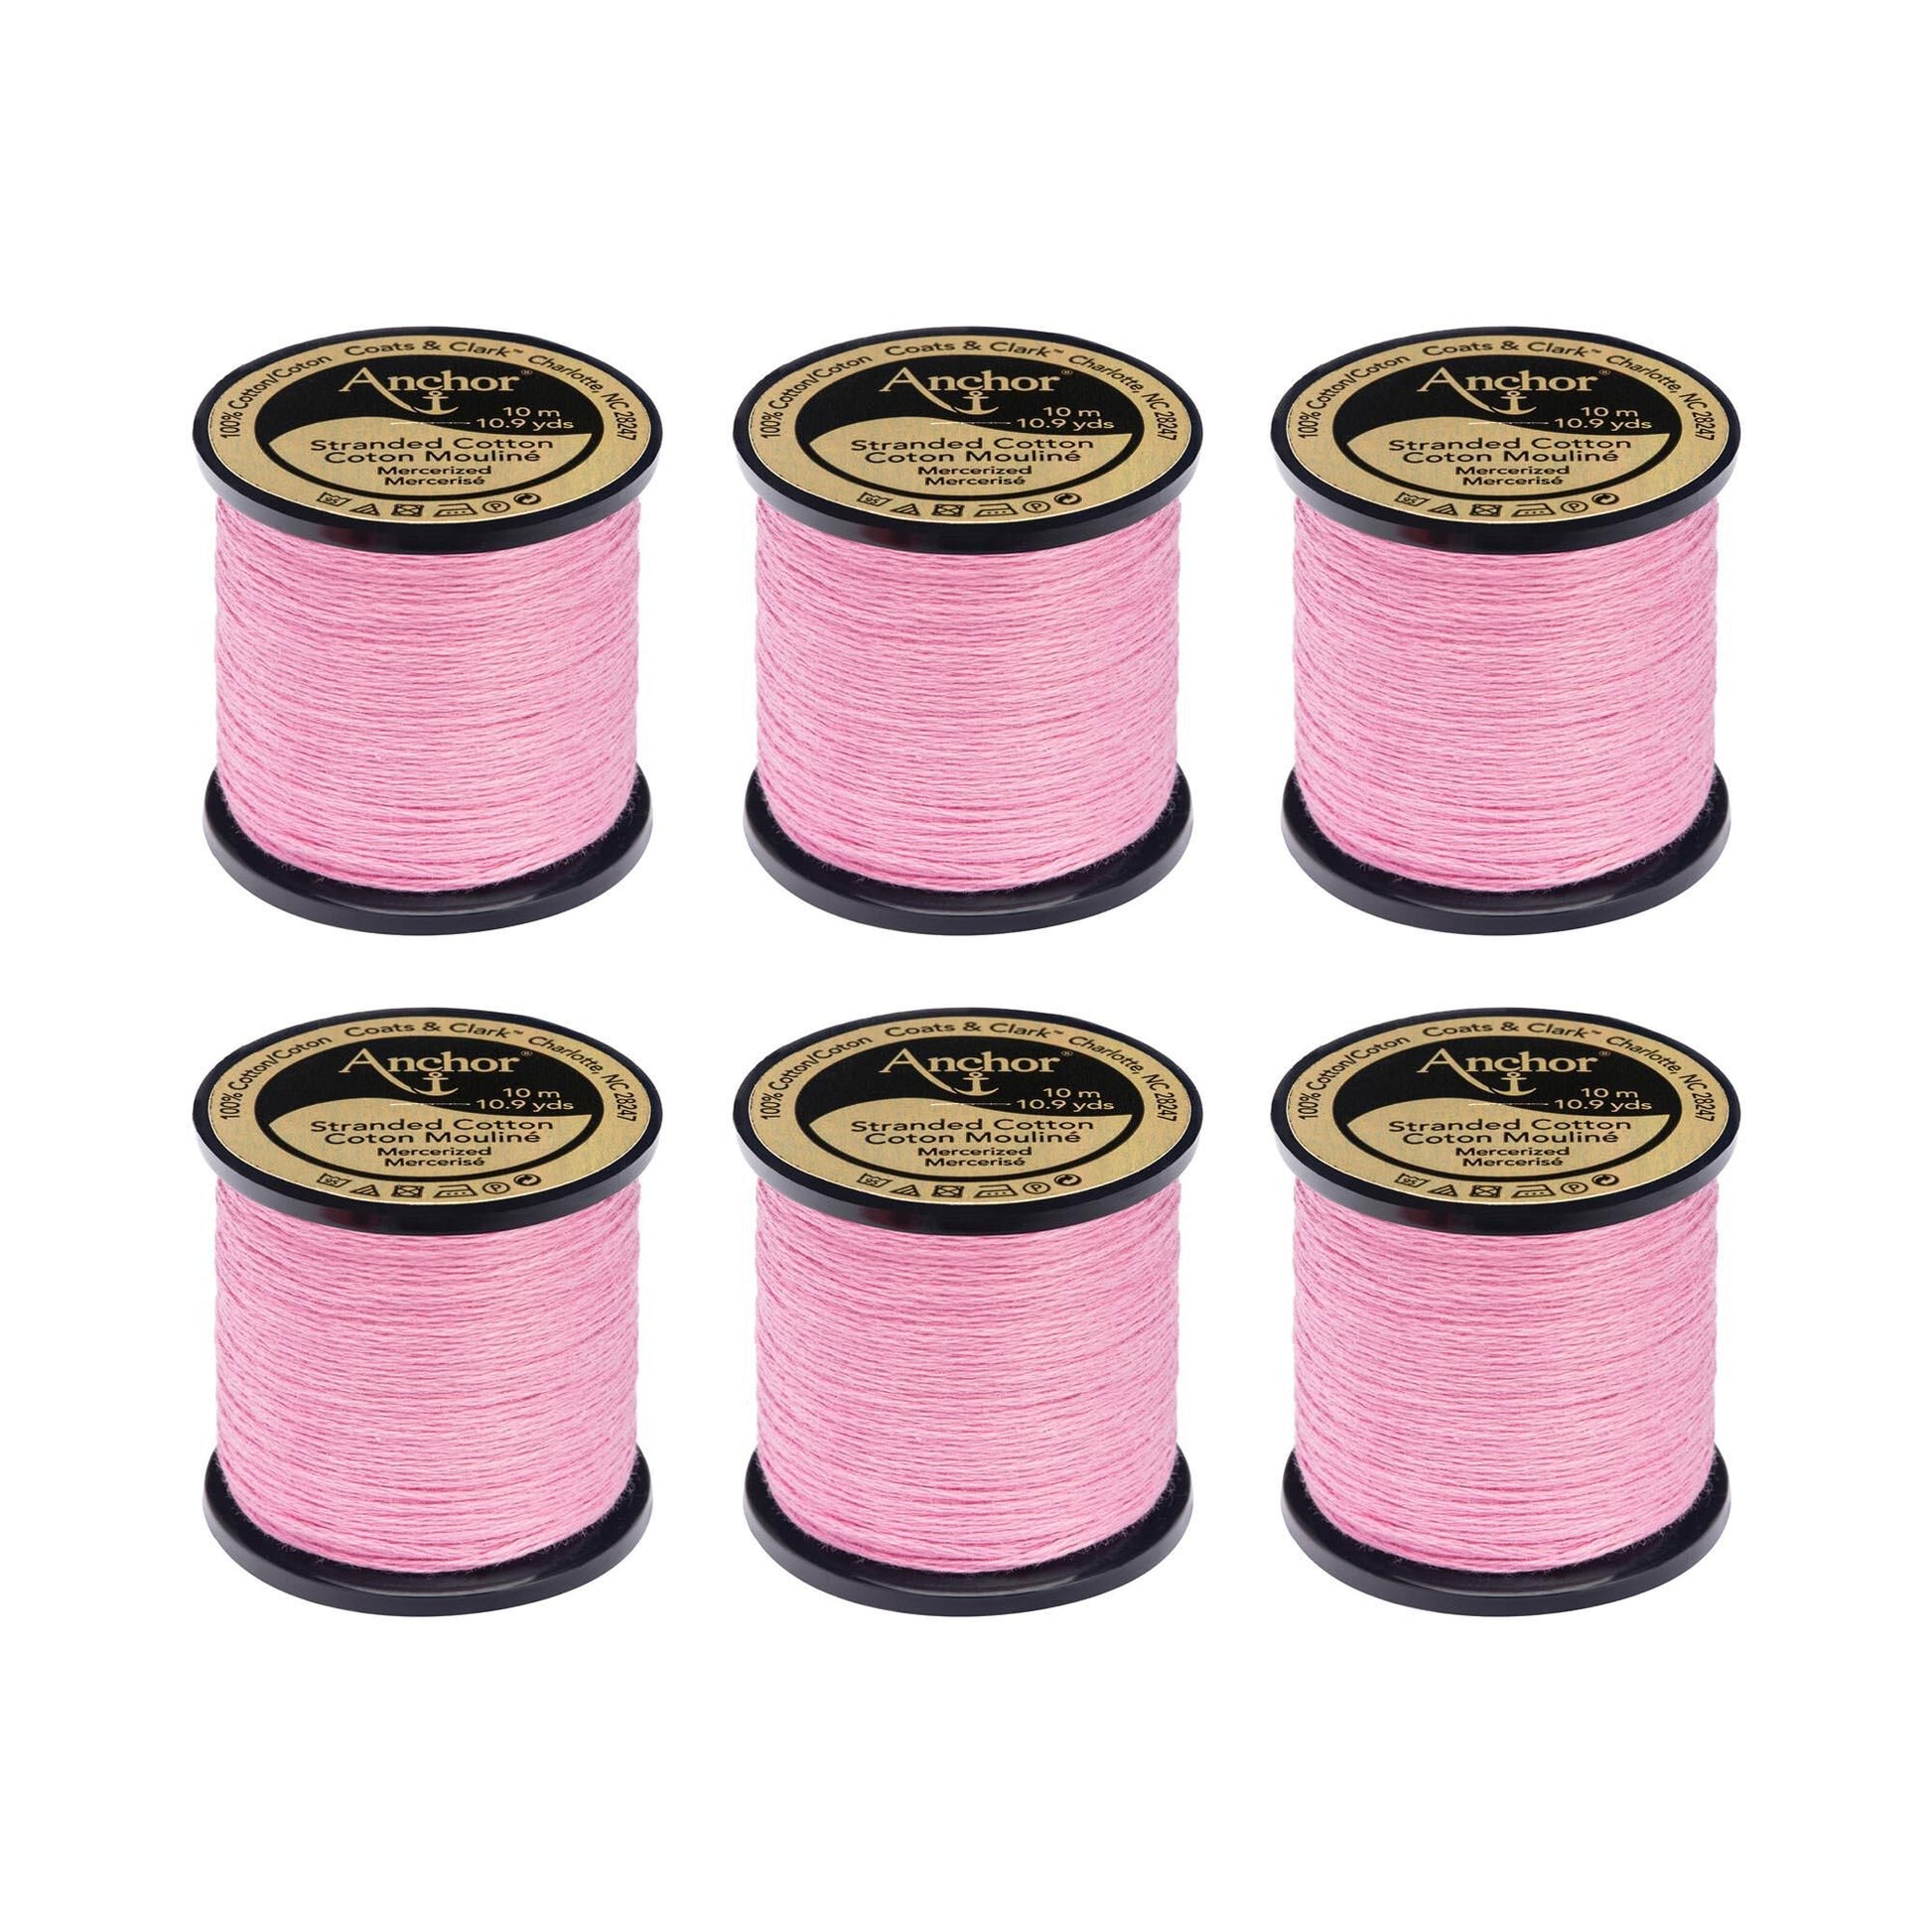 Anchor Spooled Floss 10 Meters (6 Pack) 0060 Magenta Light